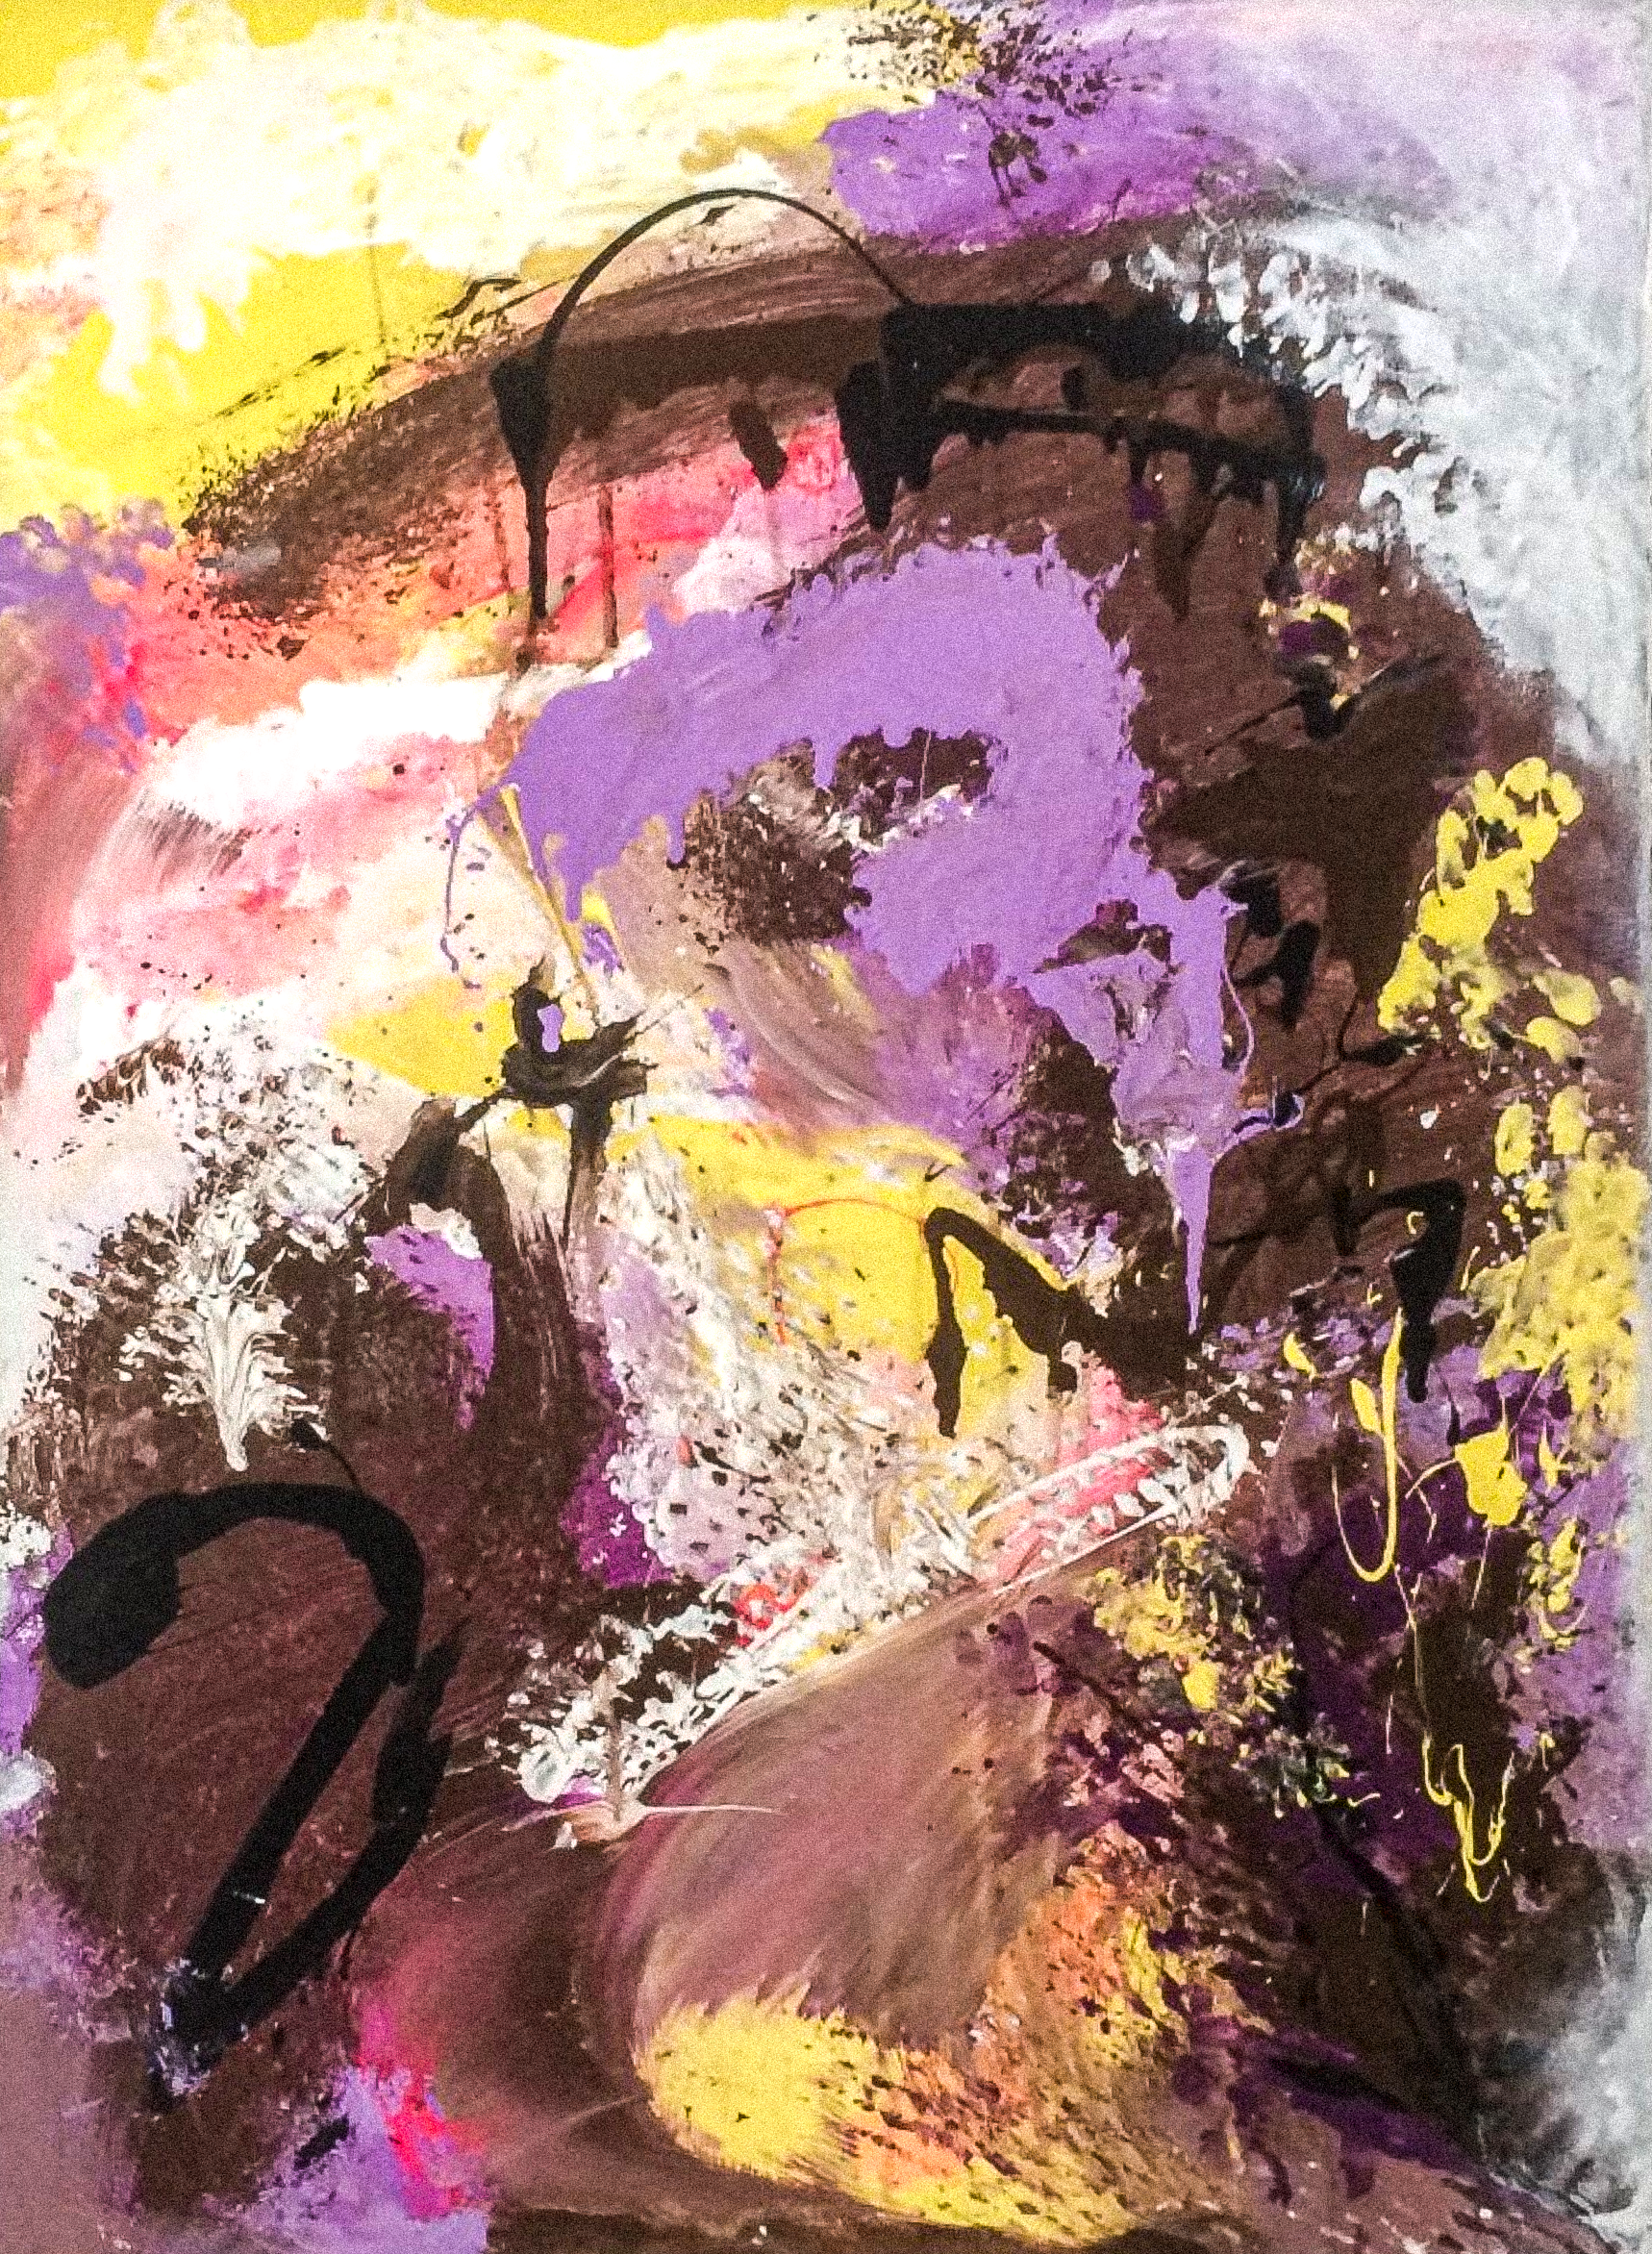 Abstract painting by Ysabelle Vautour, with bright colours of purple, yellow, pink and grey. There are expressive strokes of paint with blended and speckled textures.